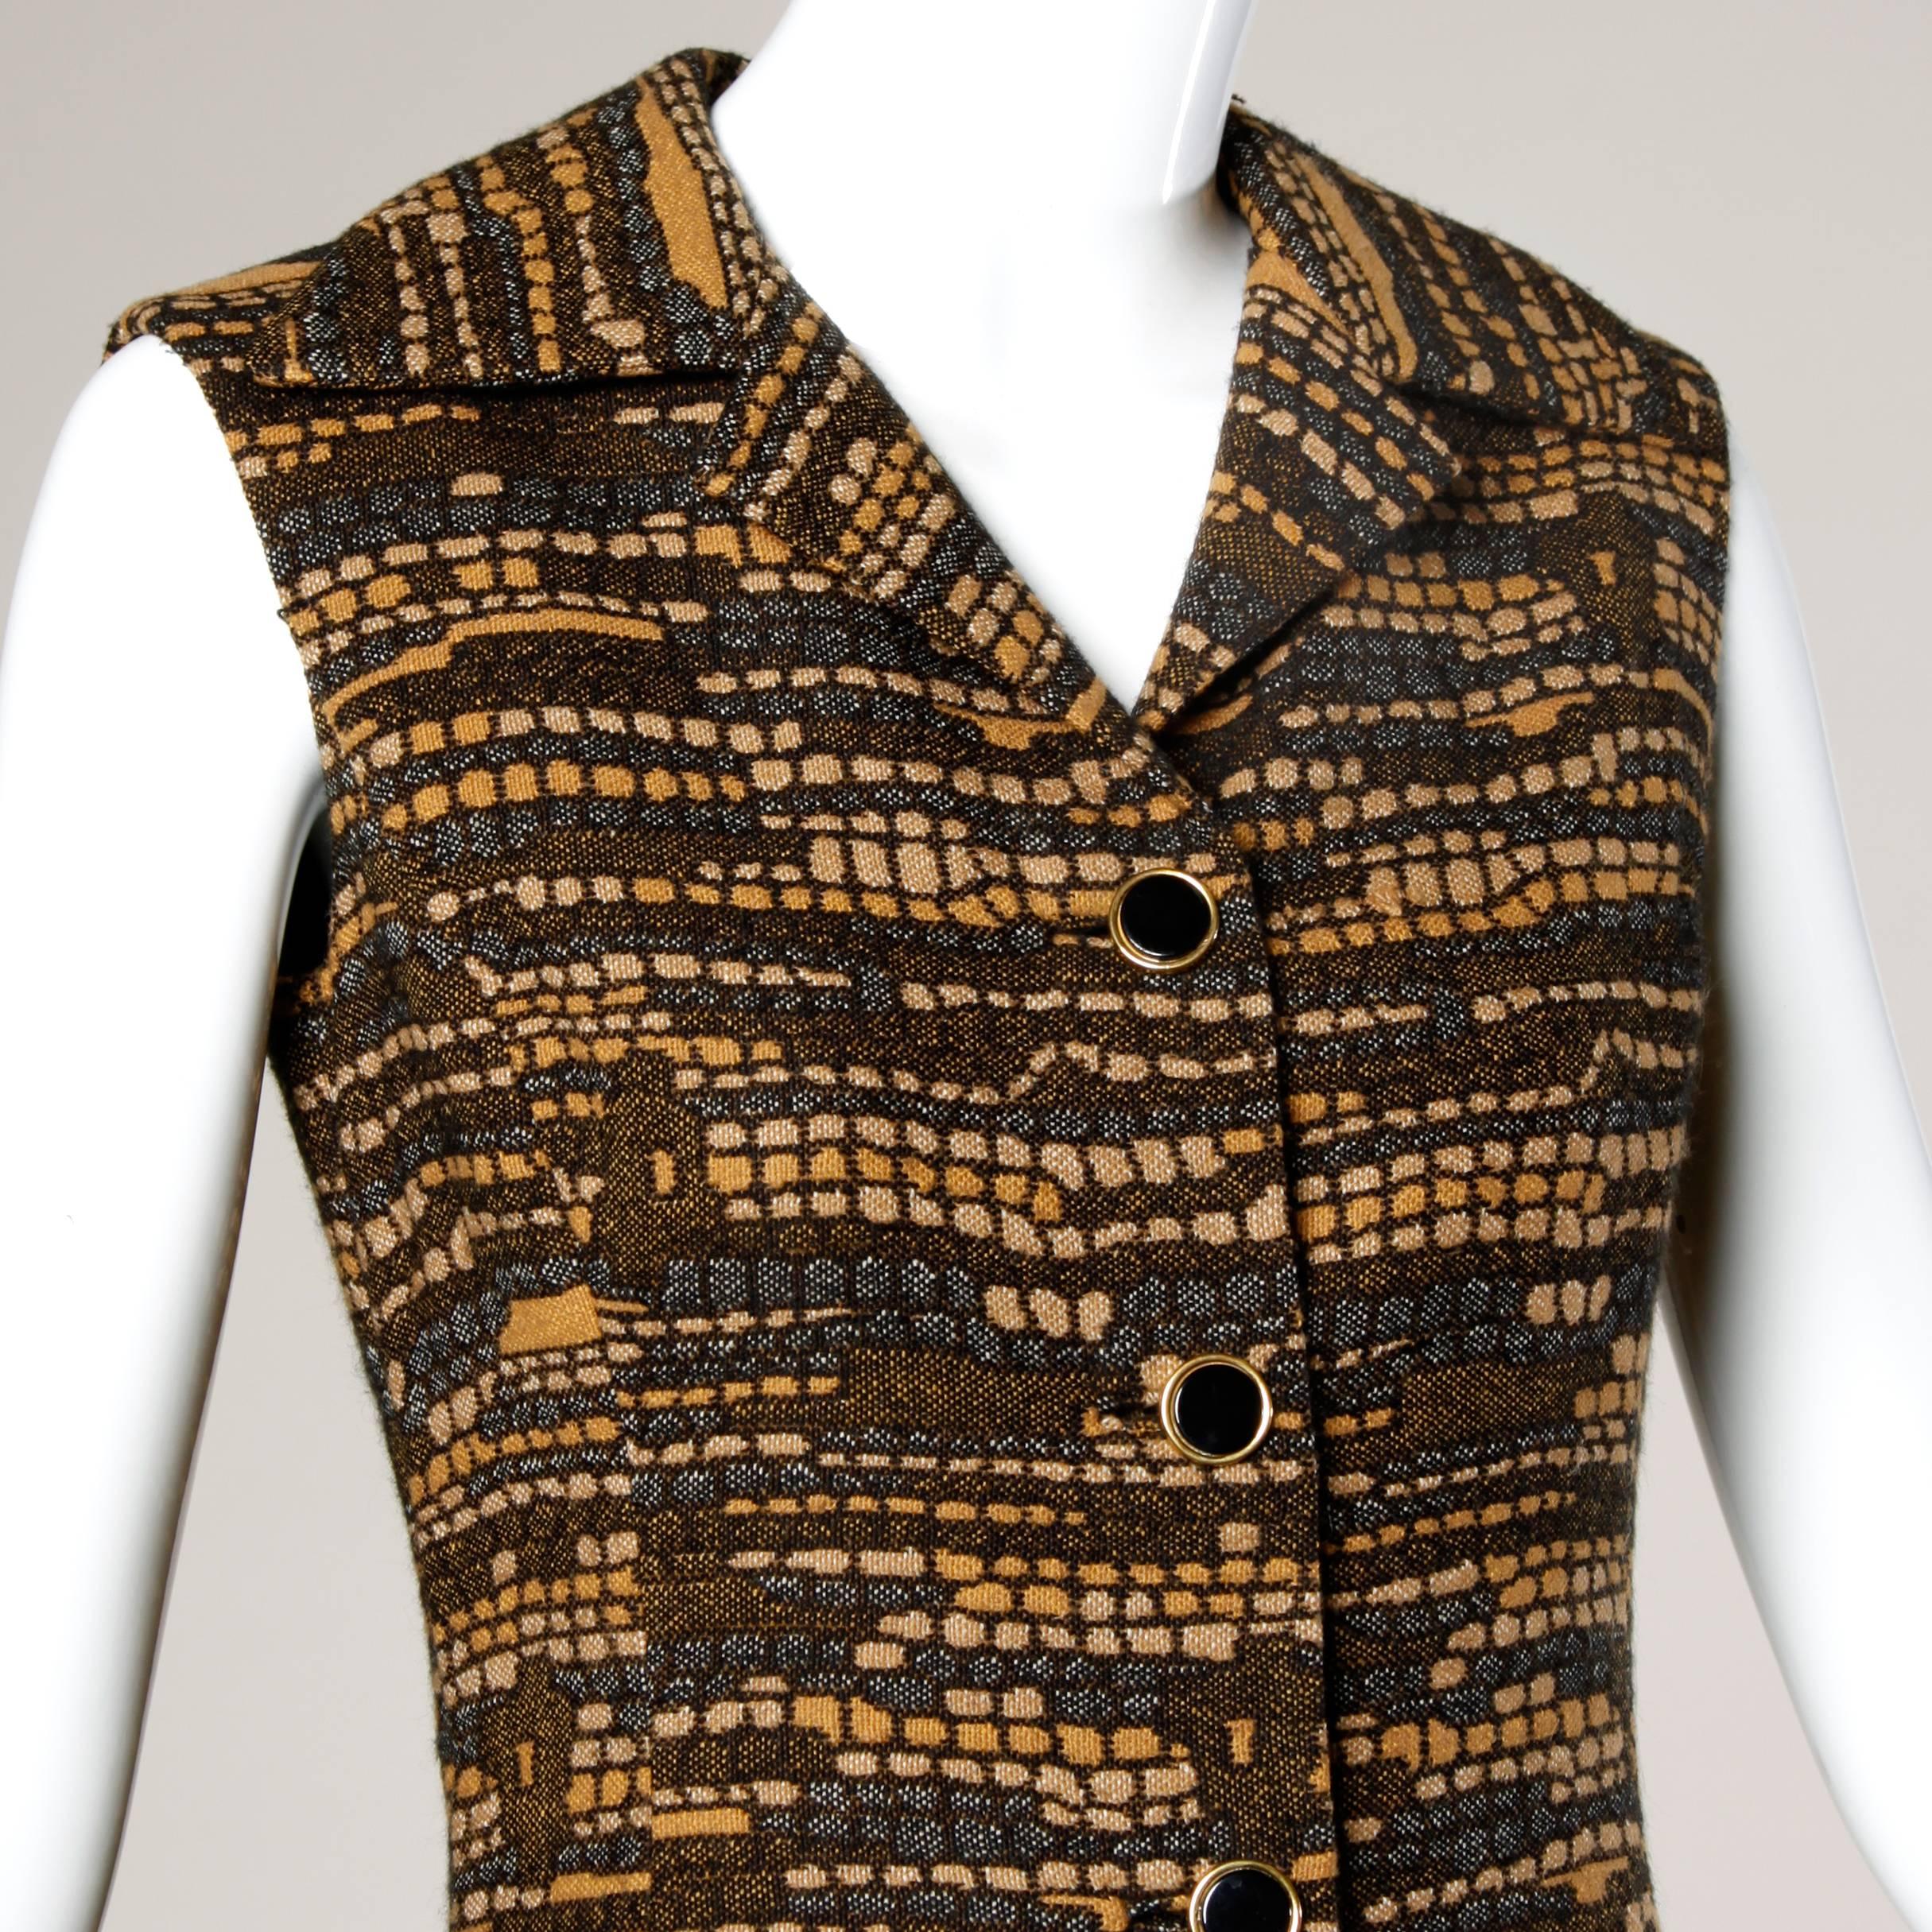 Darling vintage button up shift dress or vest by Adele Simpson! Woven midcentury fabric.

Details:

Fully Lined
Front Button Closure
Marked Size: Not Marked
Estimated Size: S-M
Color: Black/ Tan 
Fabric: Woven Wool
Label: Adele Simpson/